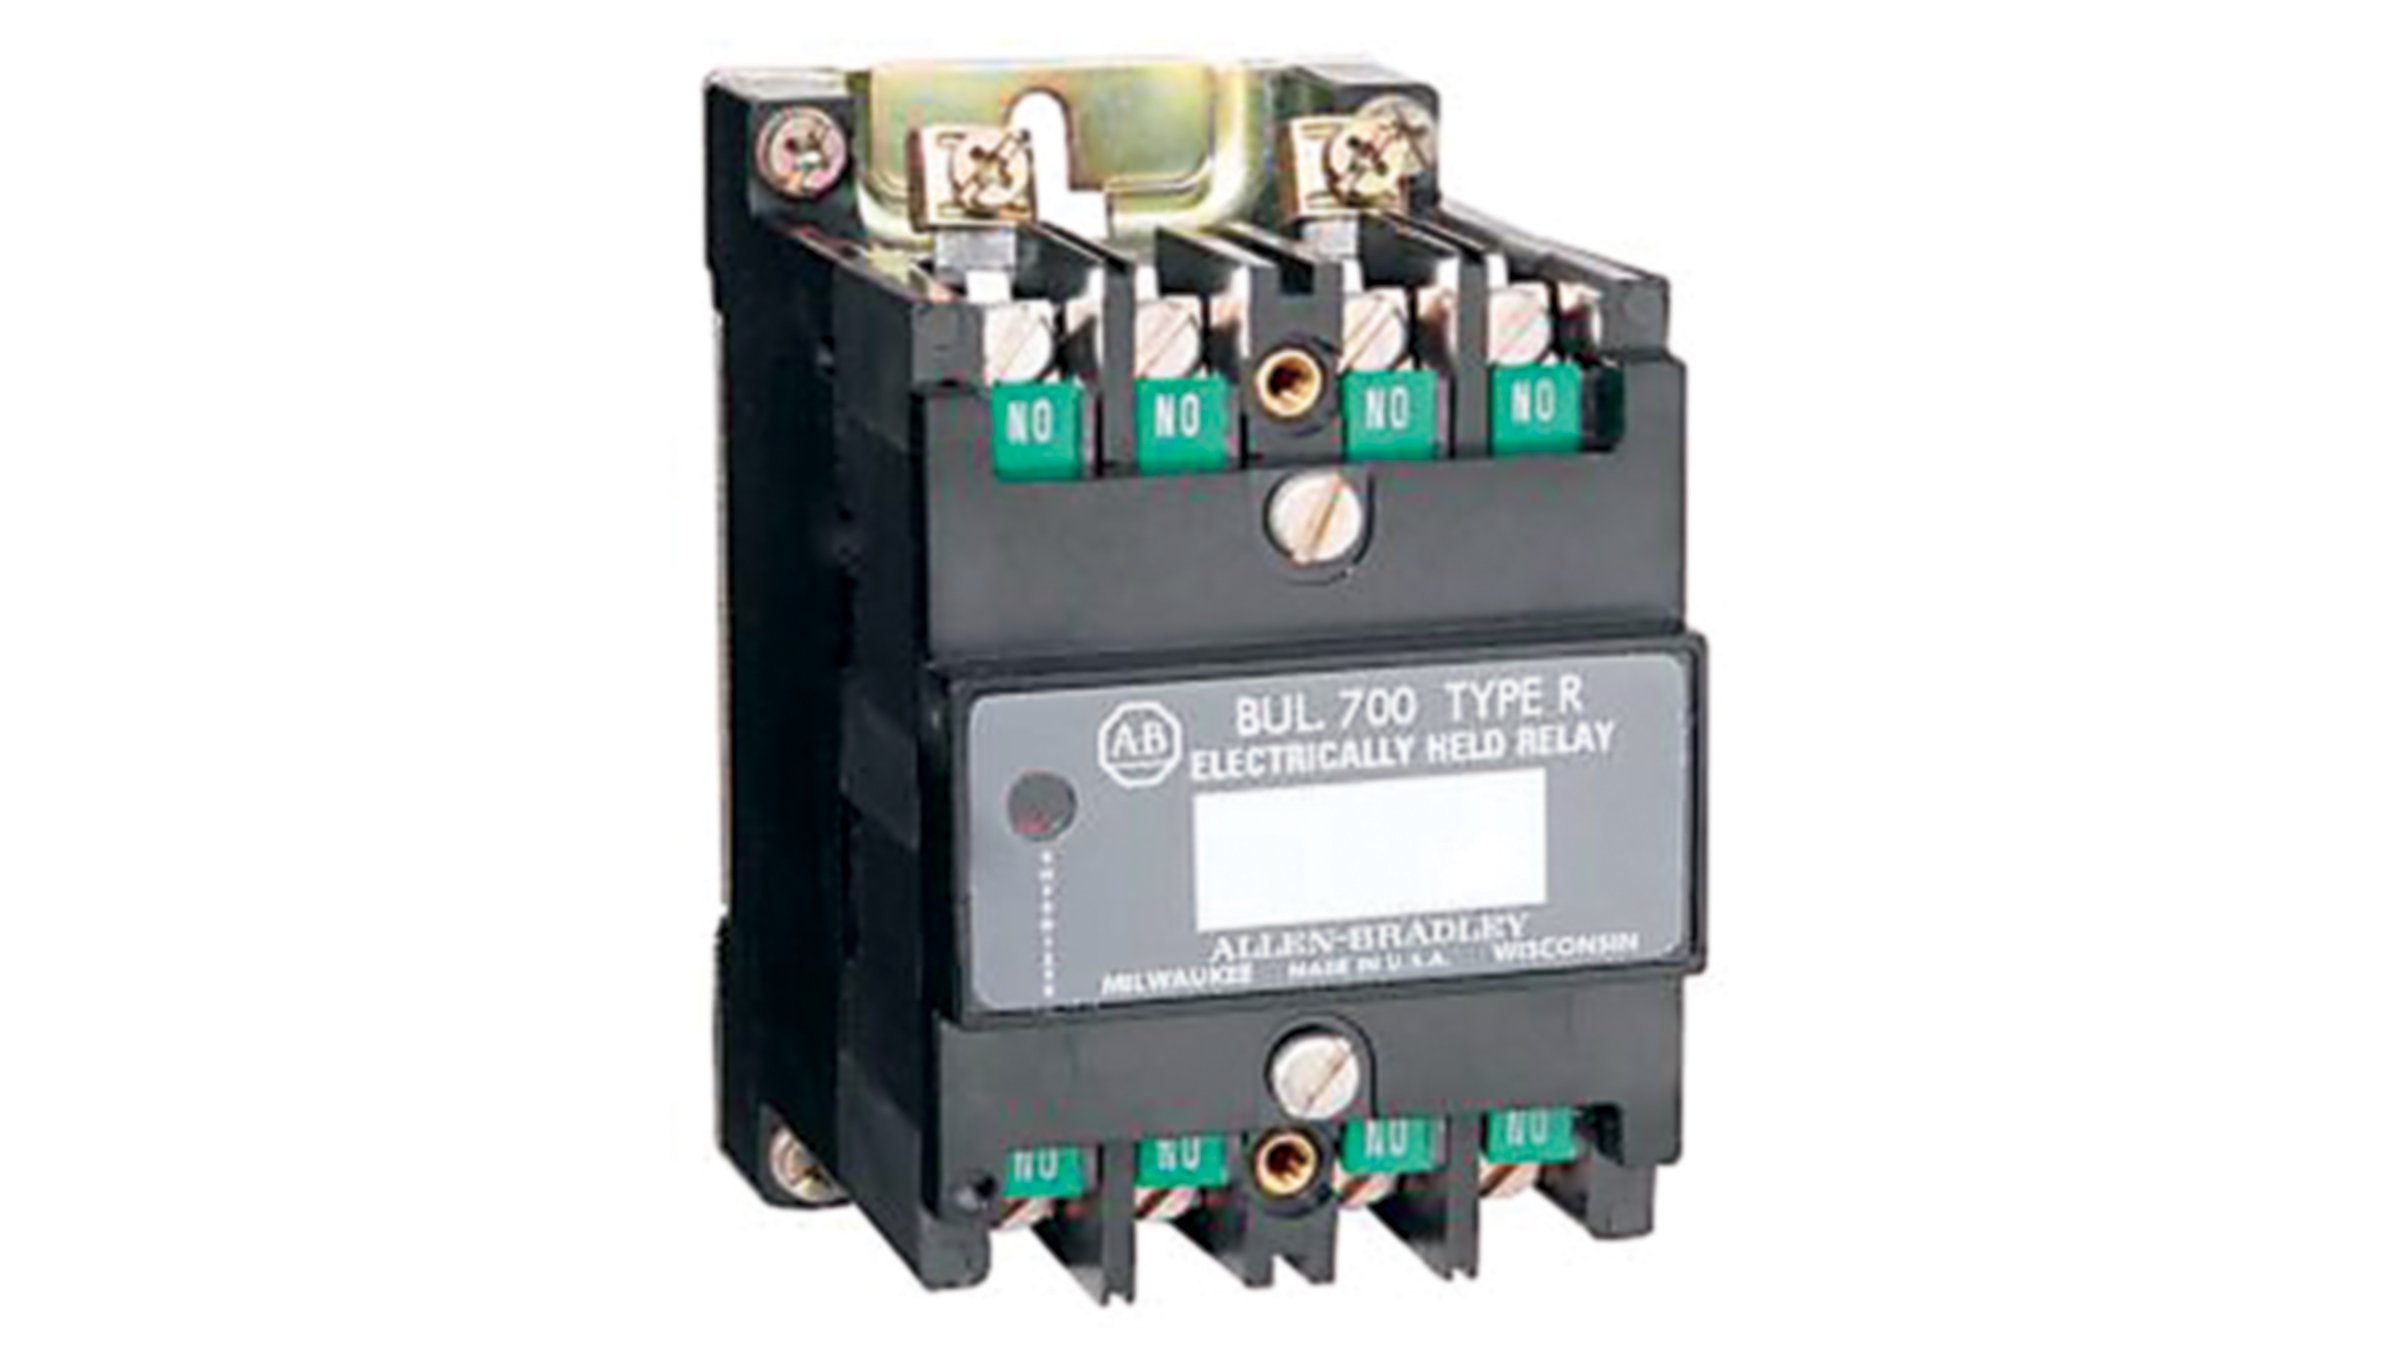 Allen-Bradley Bulletin 700-R Sealed Switch Relays work in extremely harsh, dirty environments and hazardous locations.